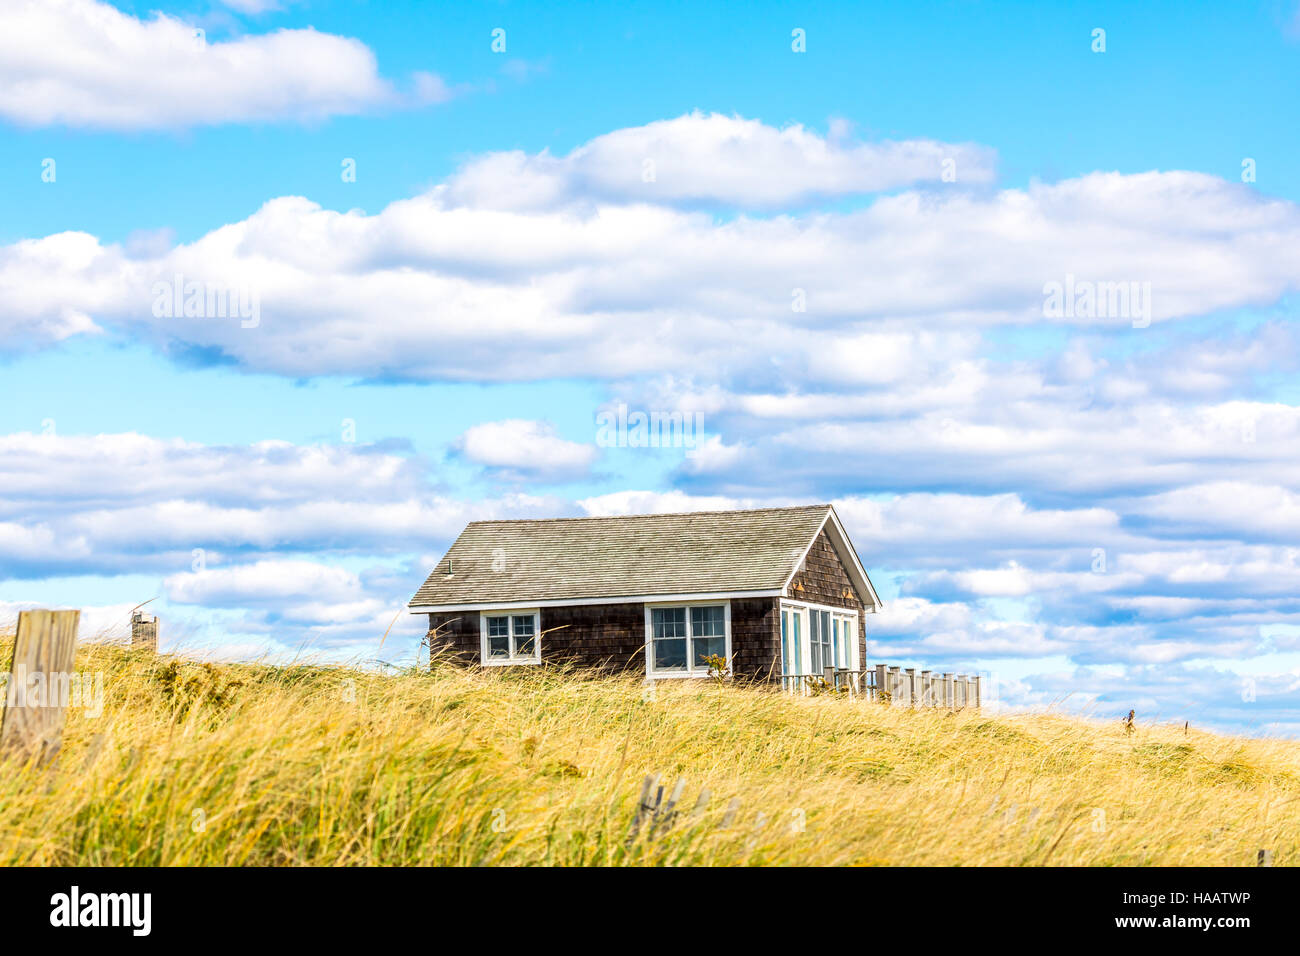 small house in a grassy area with blue sky and puffy white clouds Stock Photo